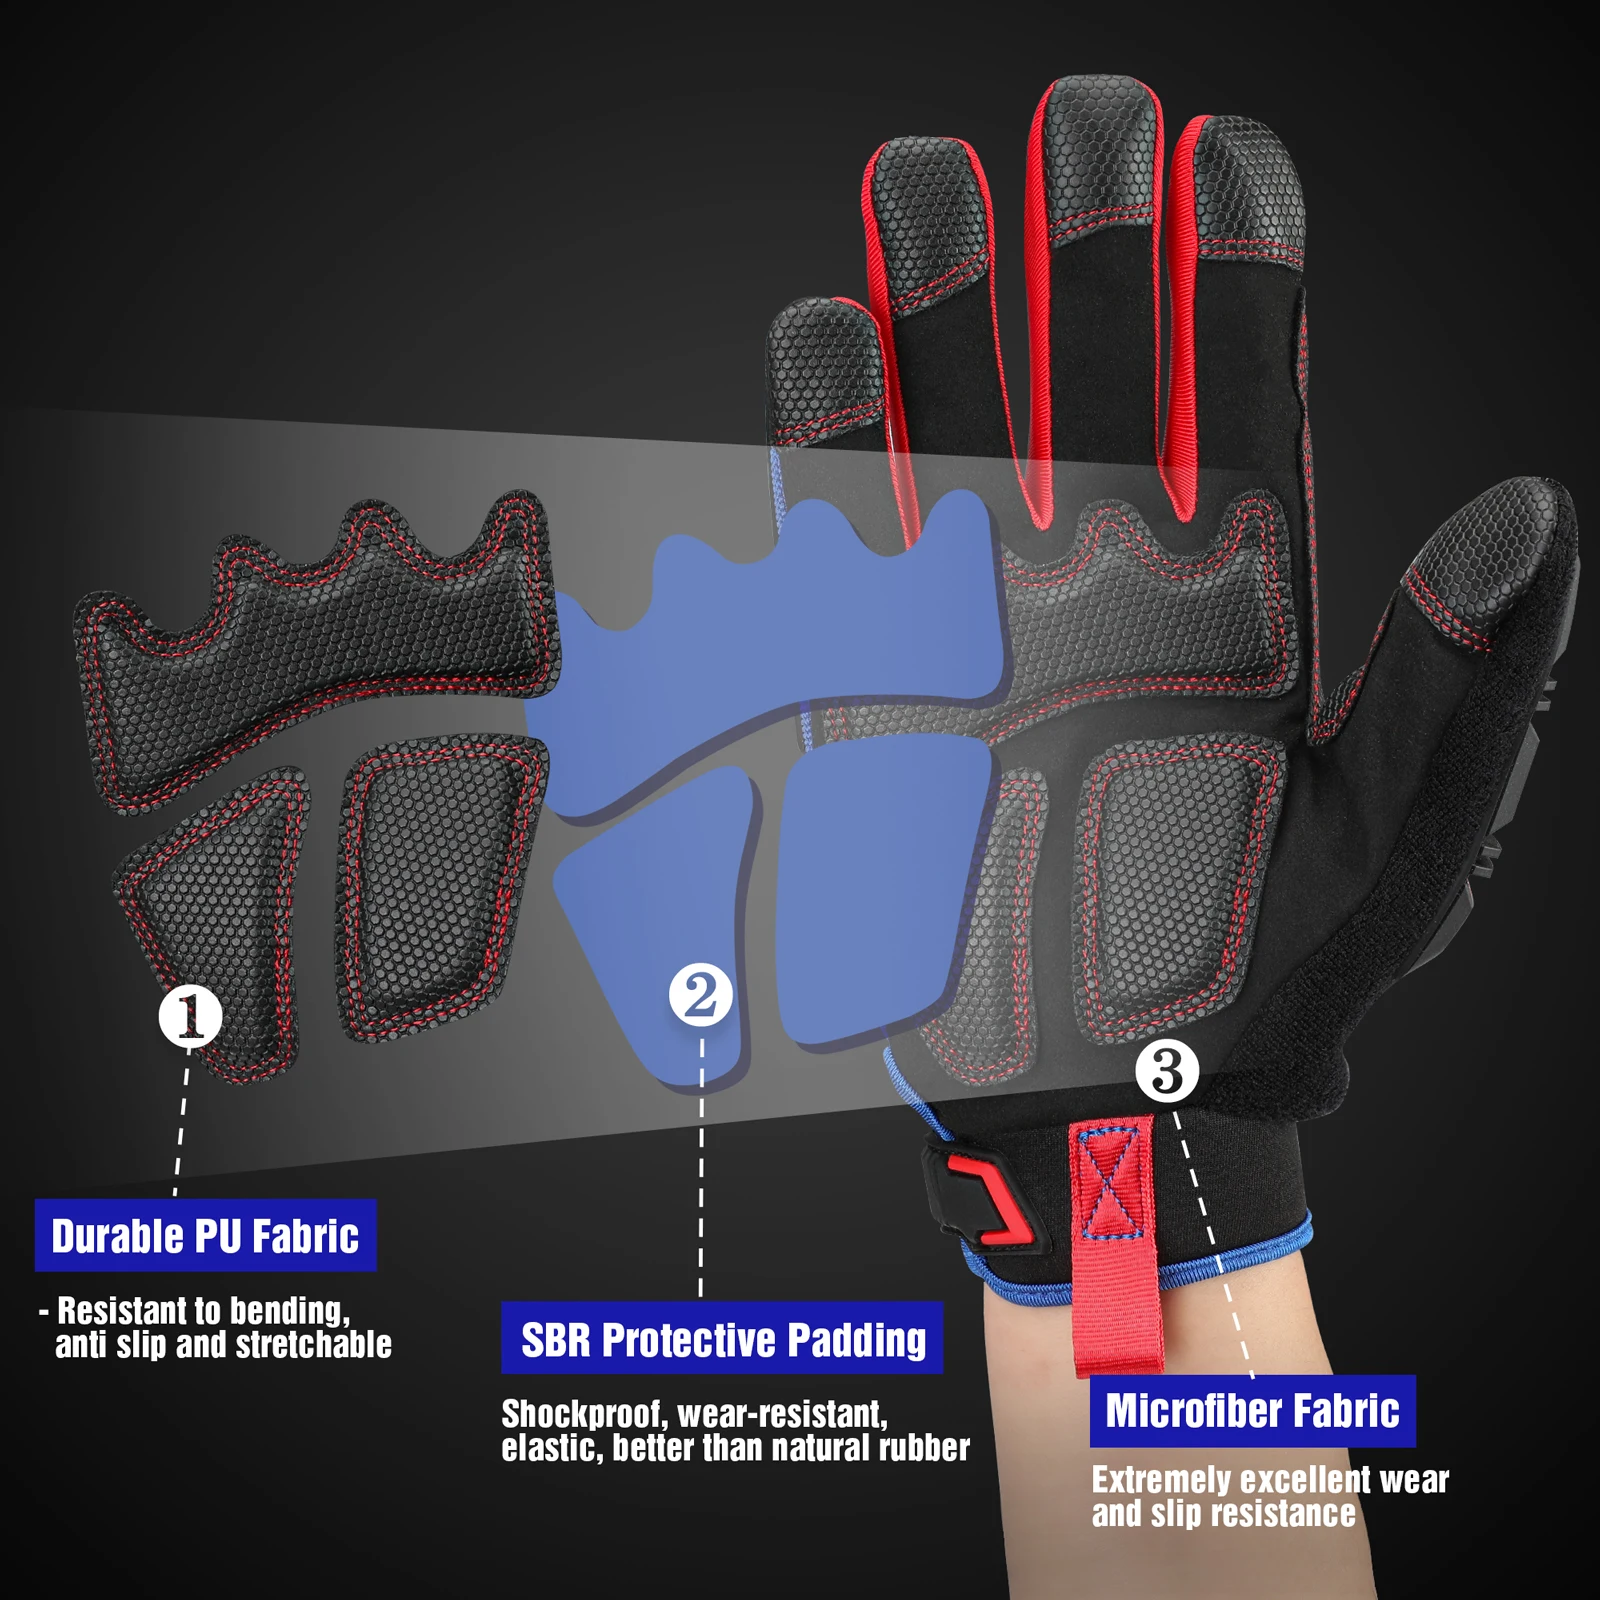 Cummins Pro Mechanic Glove - Professional Tool Grip Mechanics Work Gloves  for Men Women with Impact Protection, XL, Black and Gray